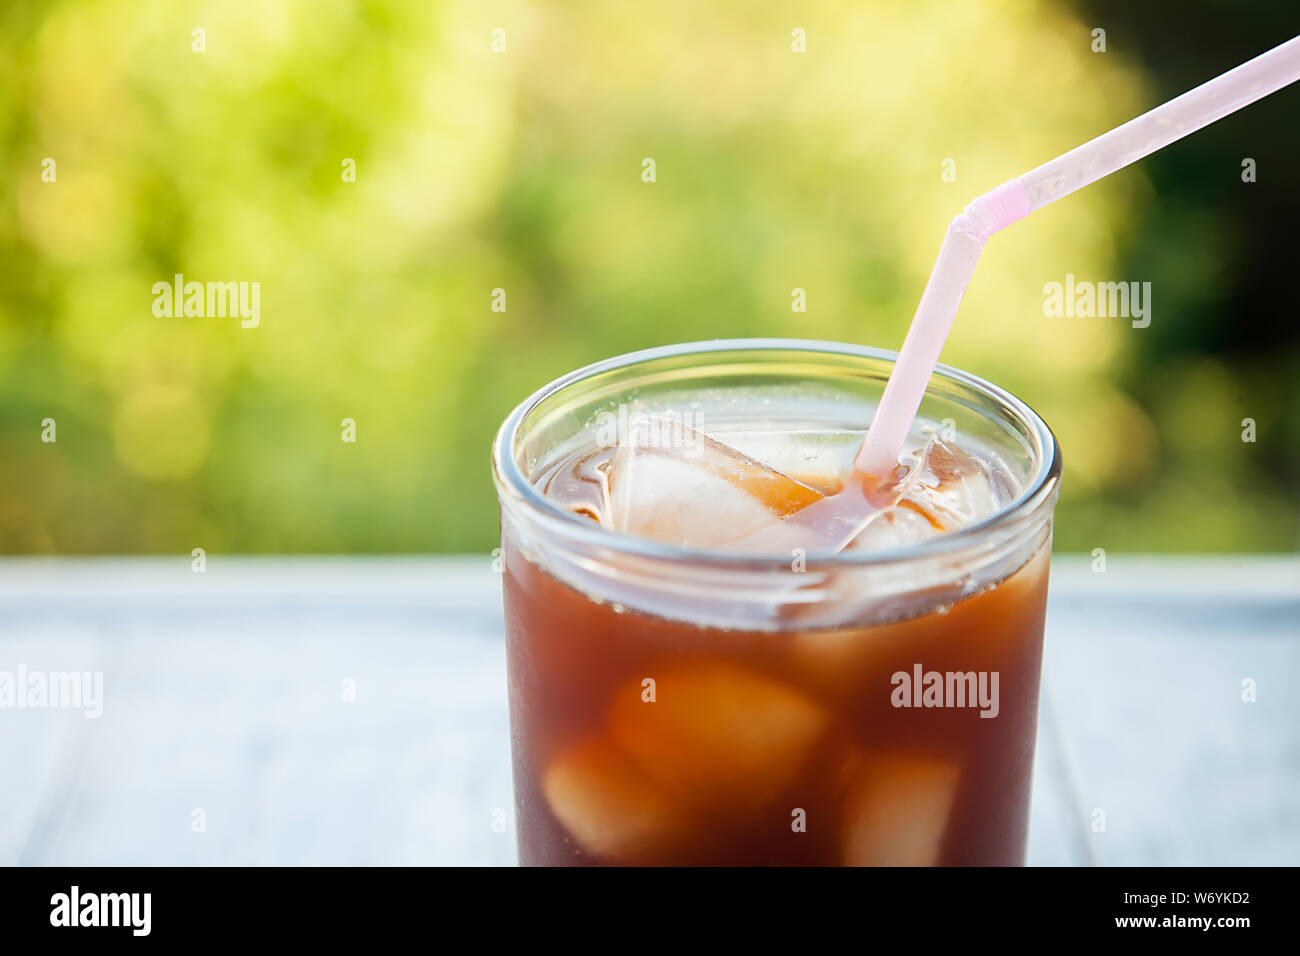 https://c8.alamy.com/comp/W6YKD2/close-up-of-an-ice-drink-with-ice-cube-in-a-glass-cup-on-a-natural-background-W6YKD2.jpg